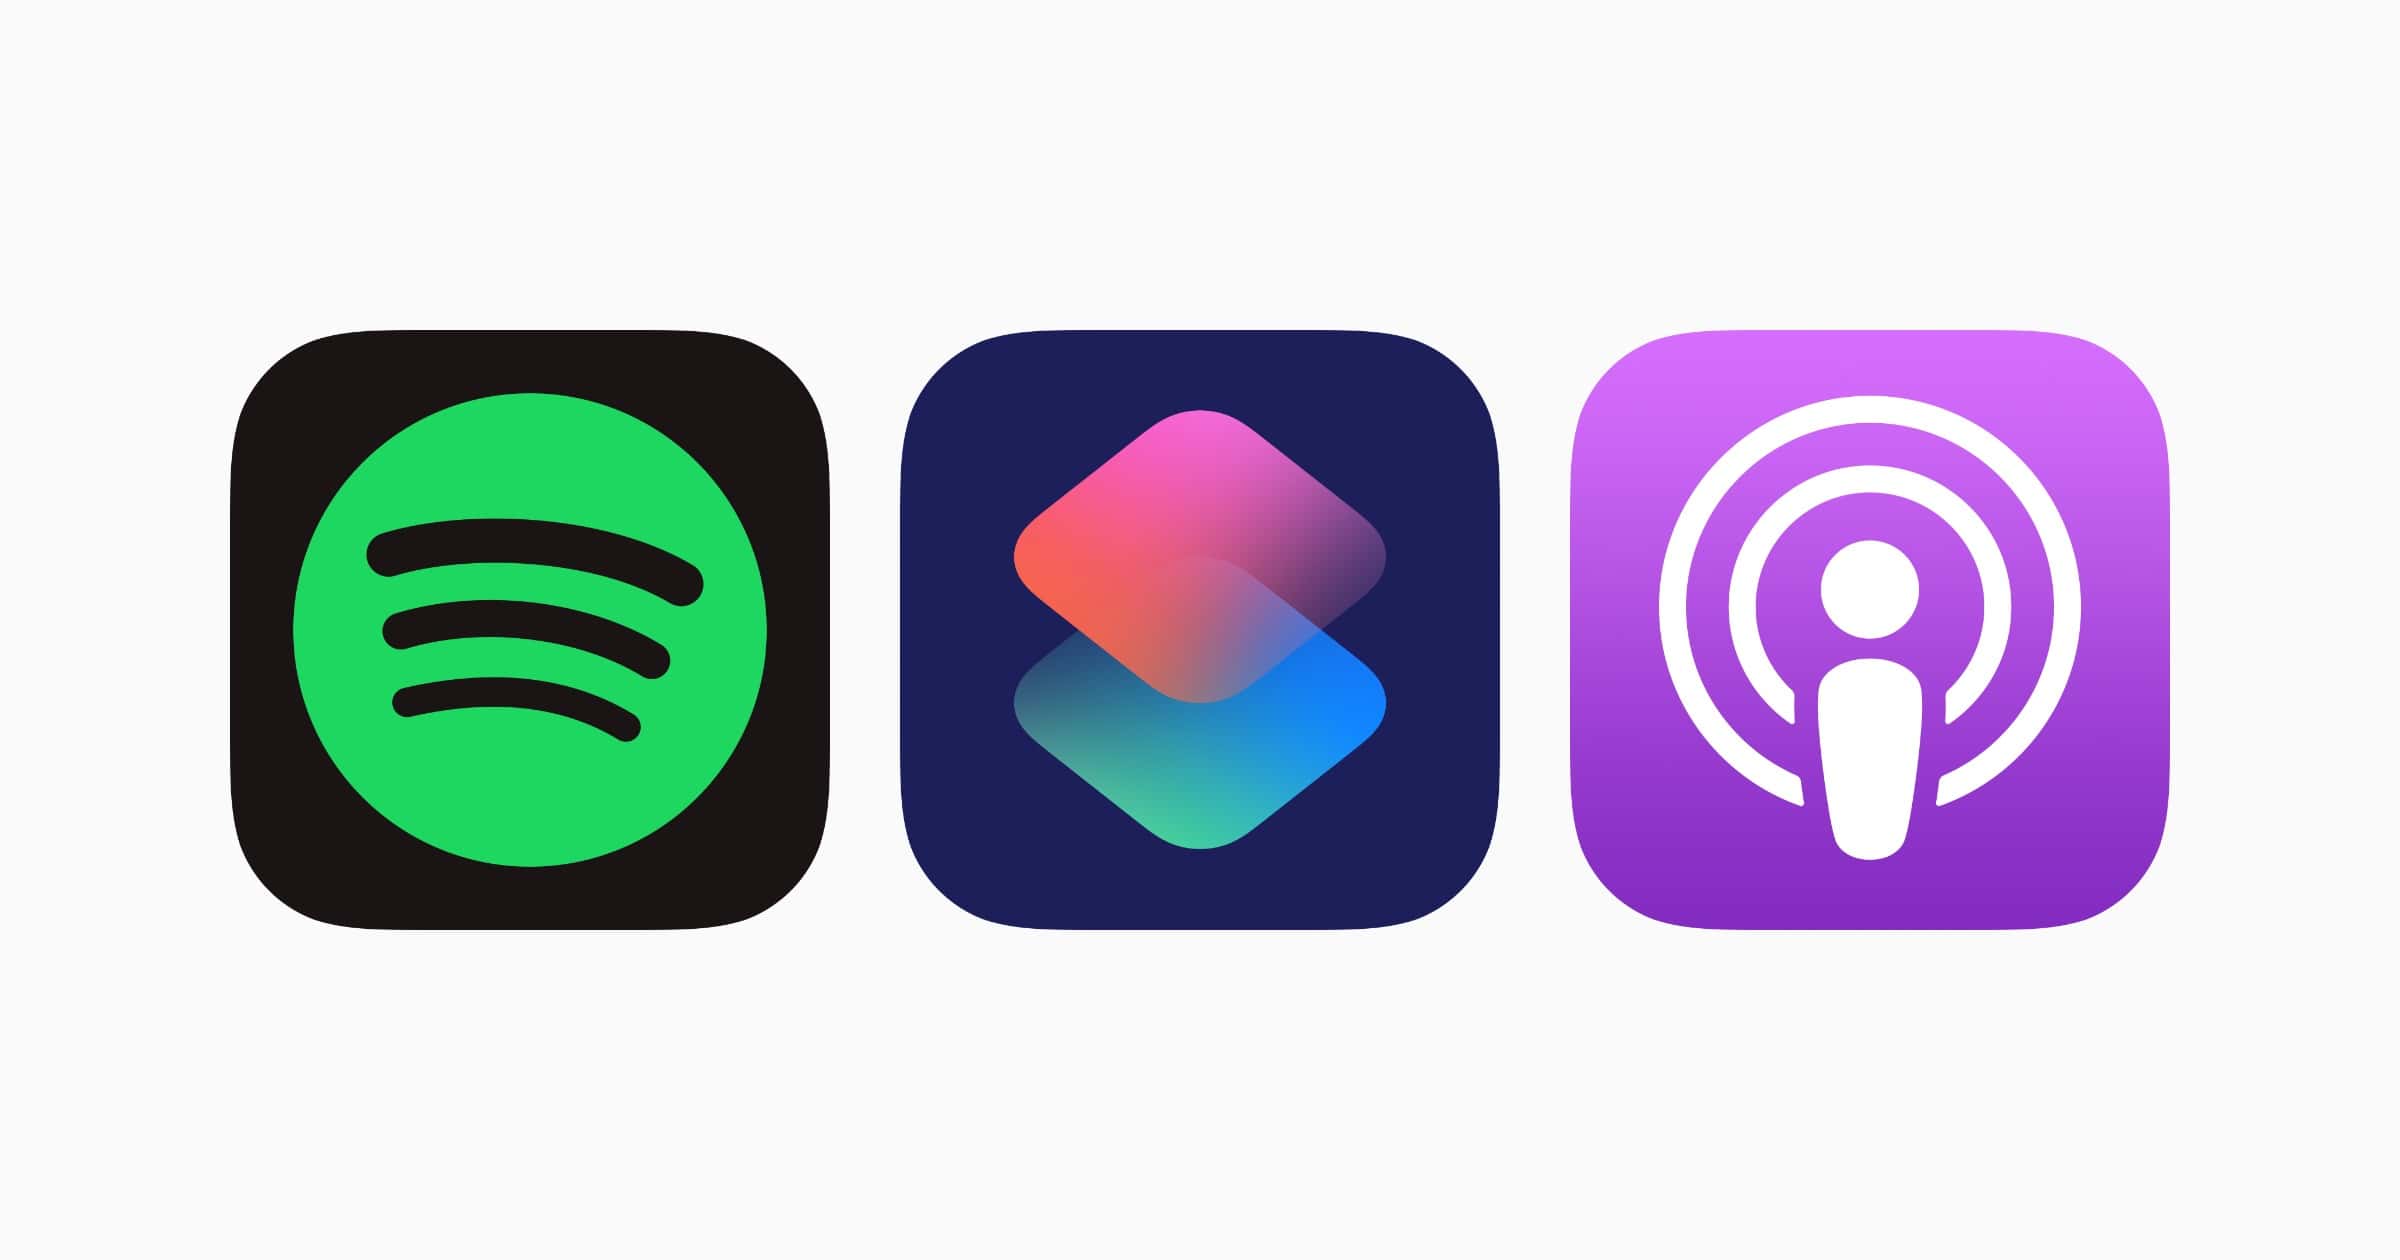 https://www.macobserver.com/wp-content/uploads/2021/01/Icons-of-Spotify-shortcuts-podcasts.jpg